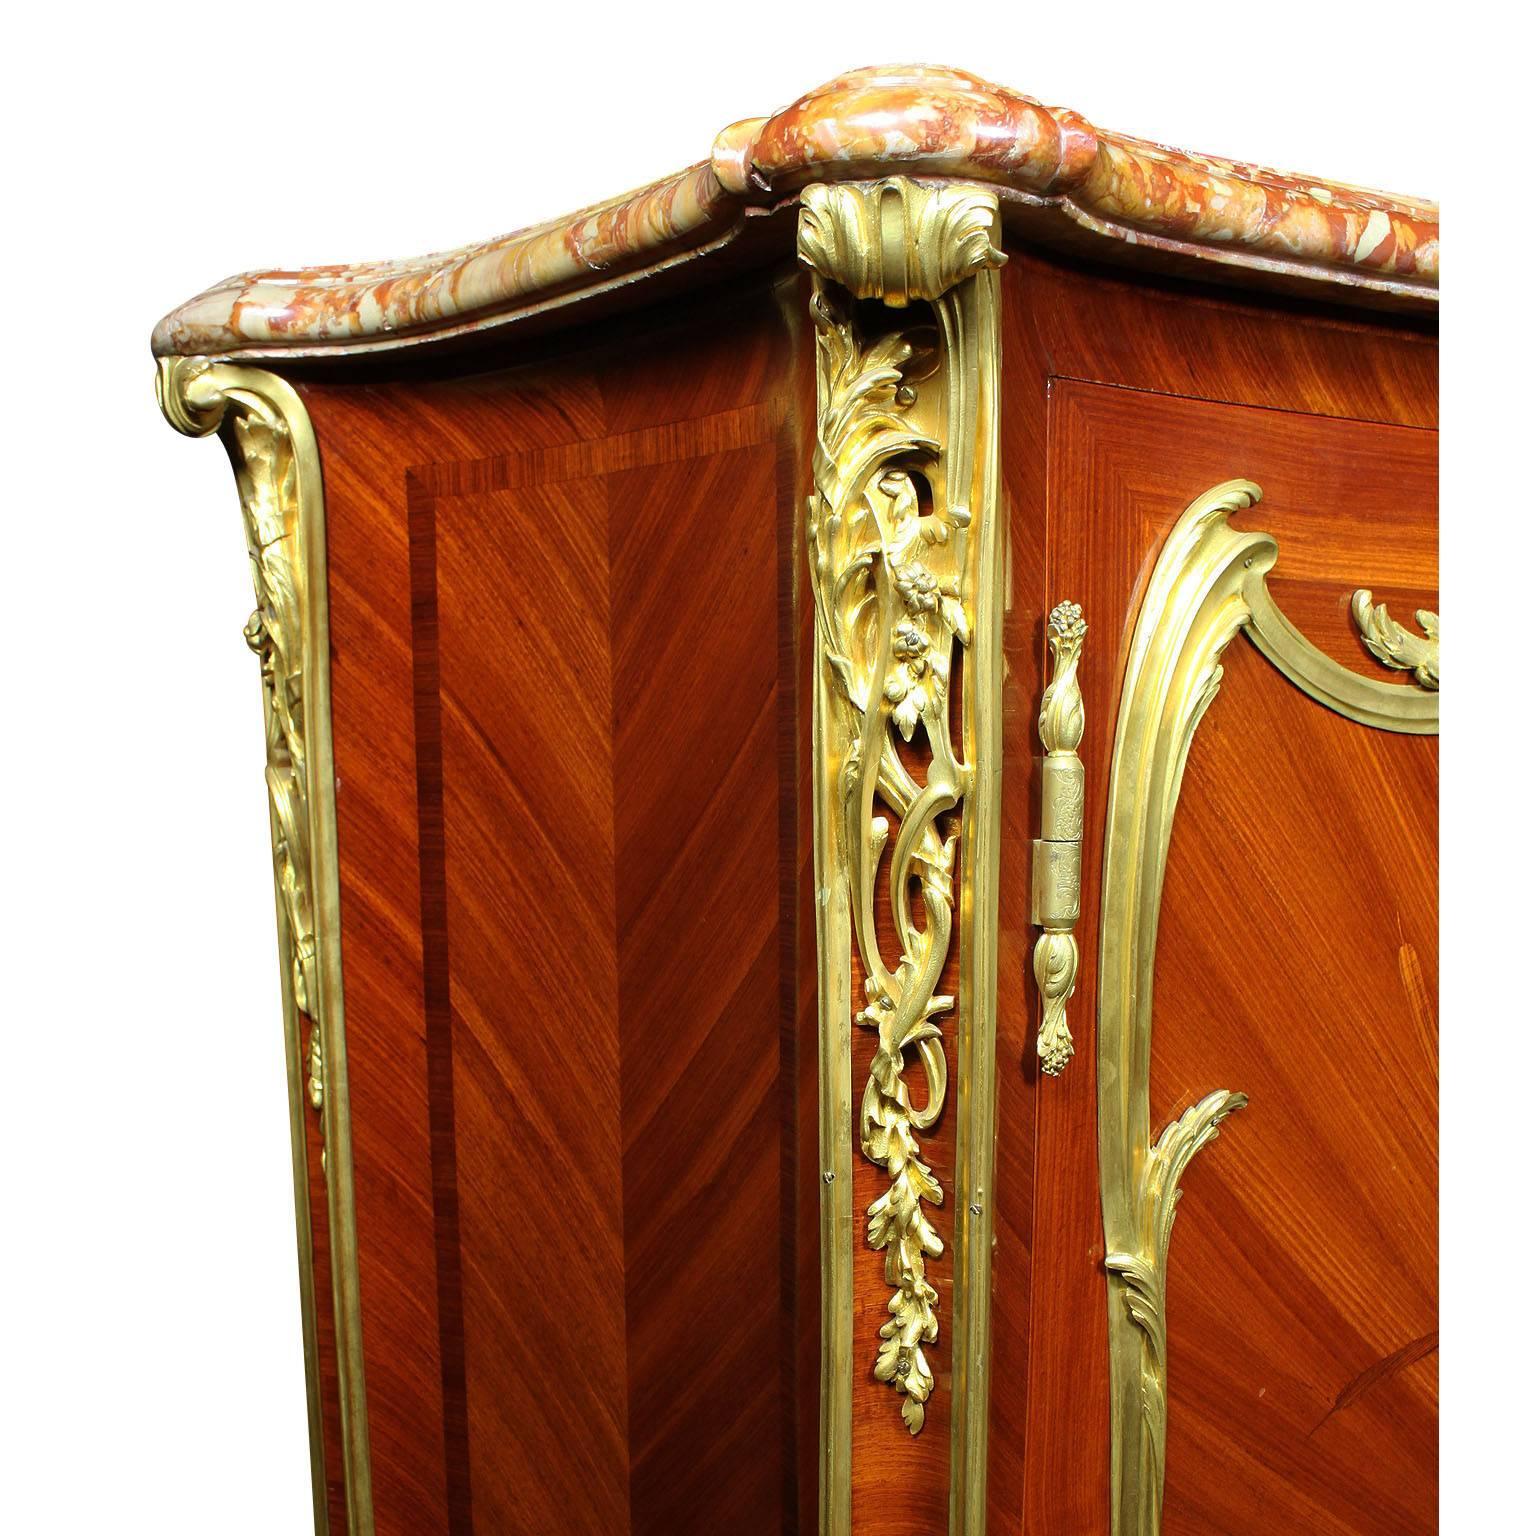 Carved French 19th Century Louis XV Style Ormolu Mounted Marquetry Meuble D'appui For Sale